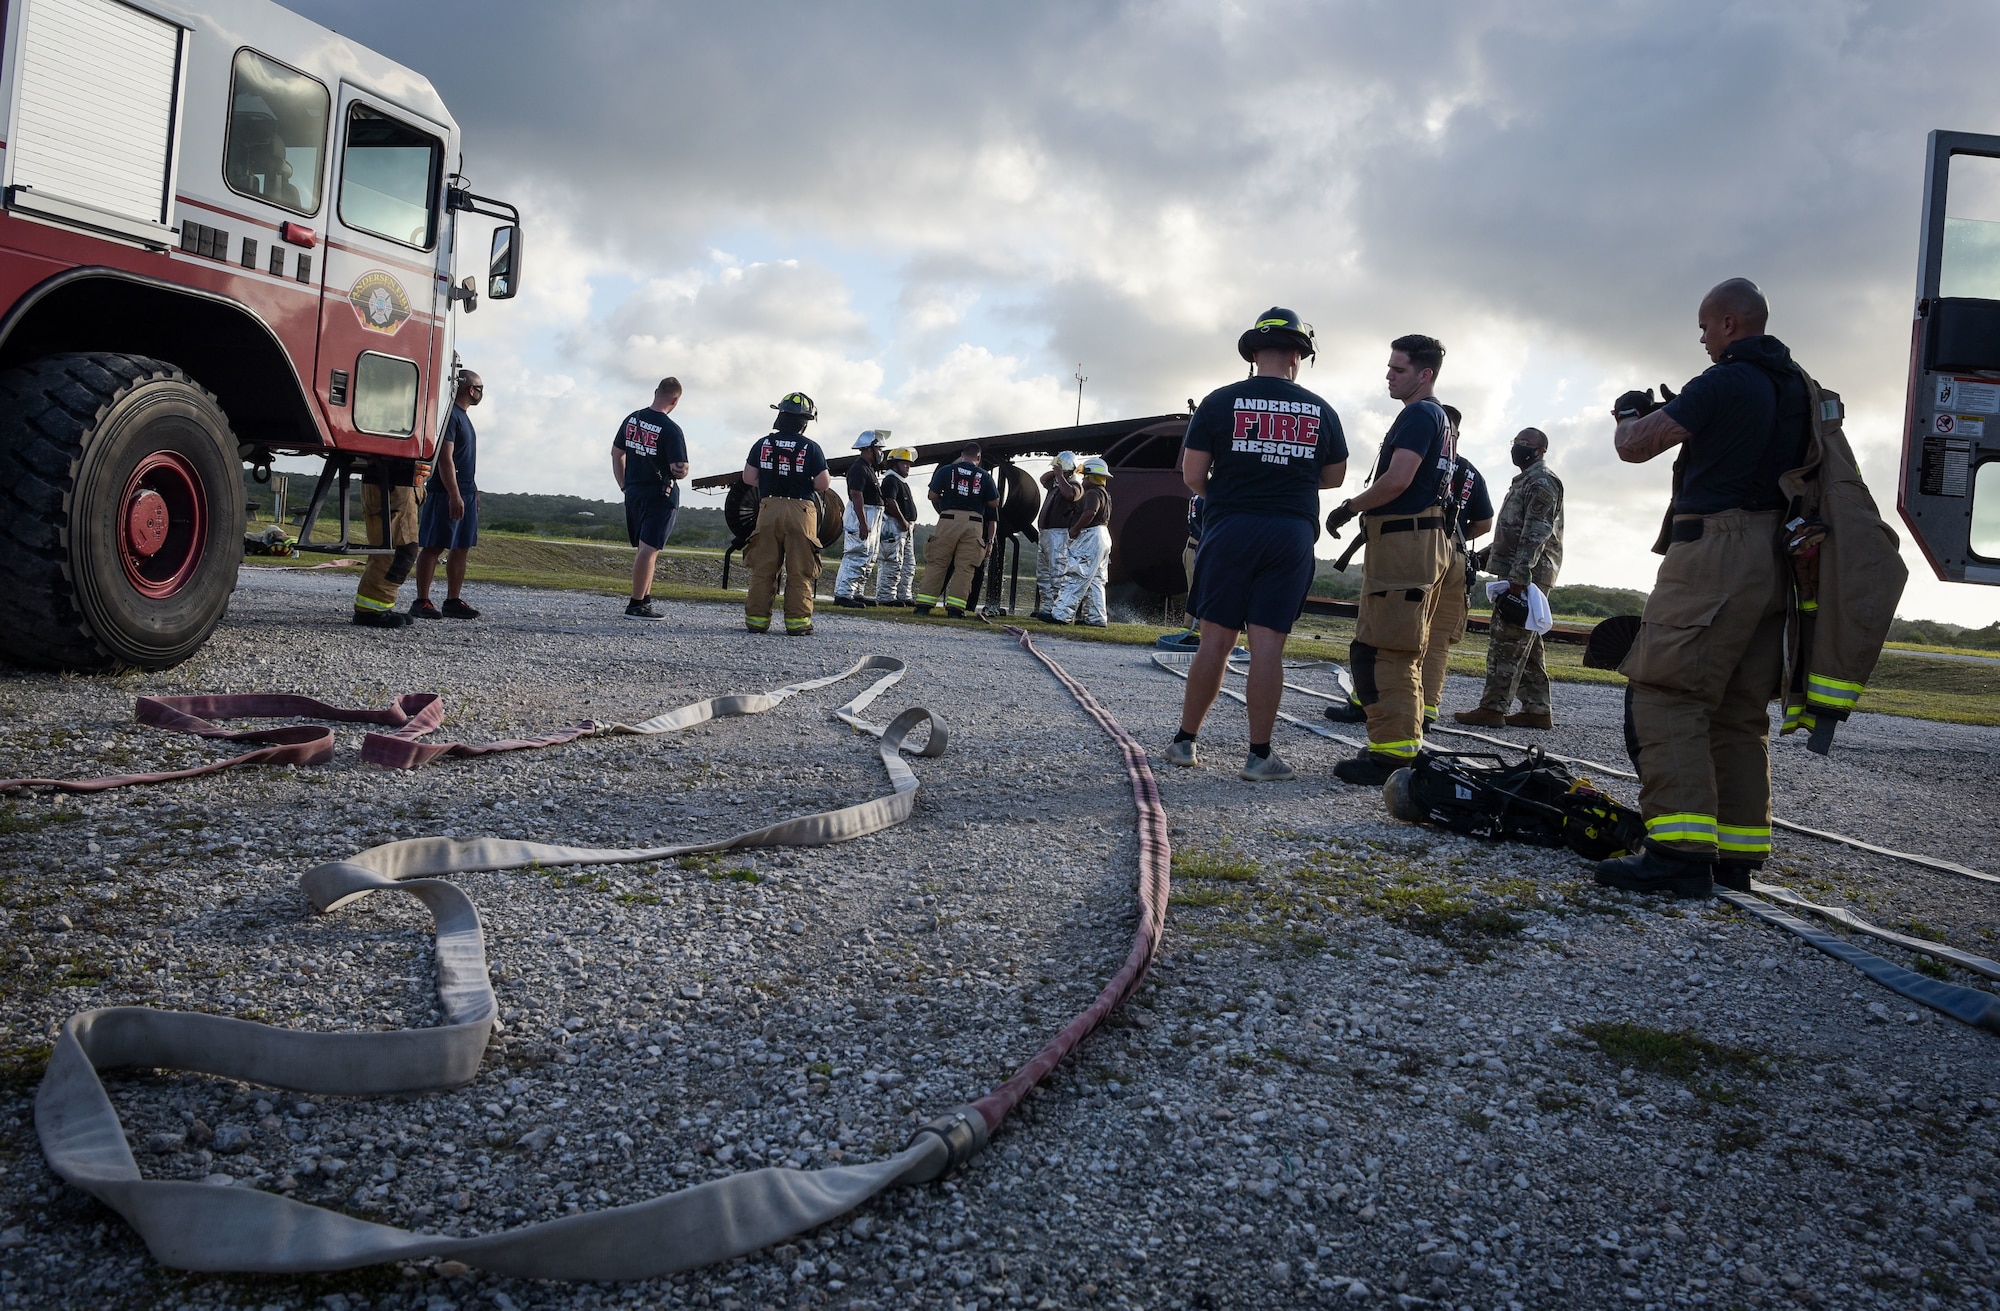 U.S. Air Force and Palau firefighters prepare fire hoses during joint aircraft fire training at Andersen Air Force Base, Guam, May 11, 2021.